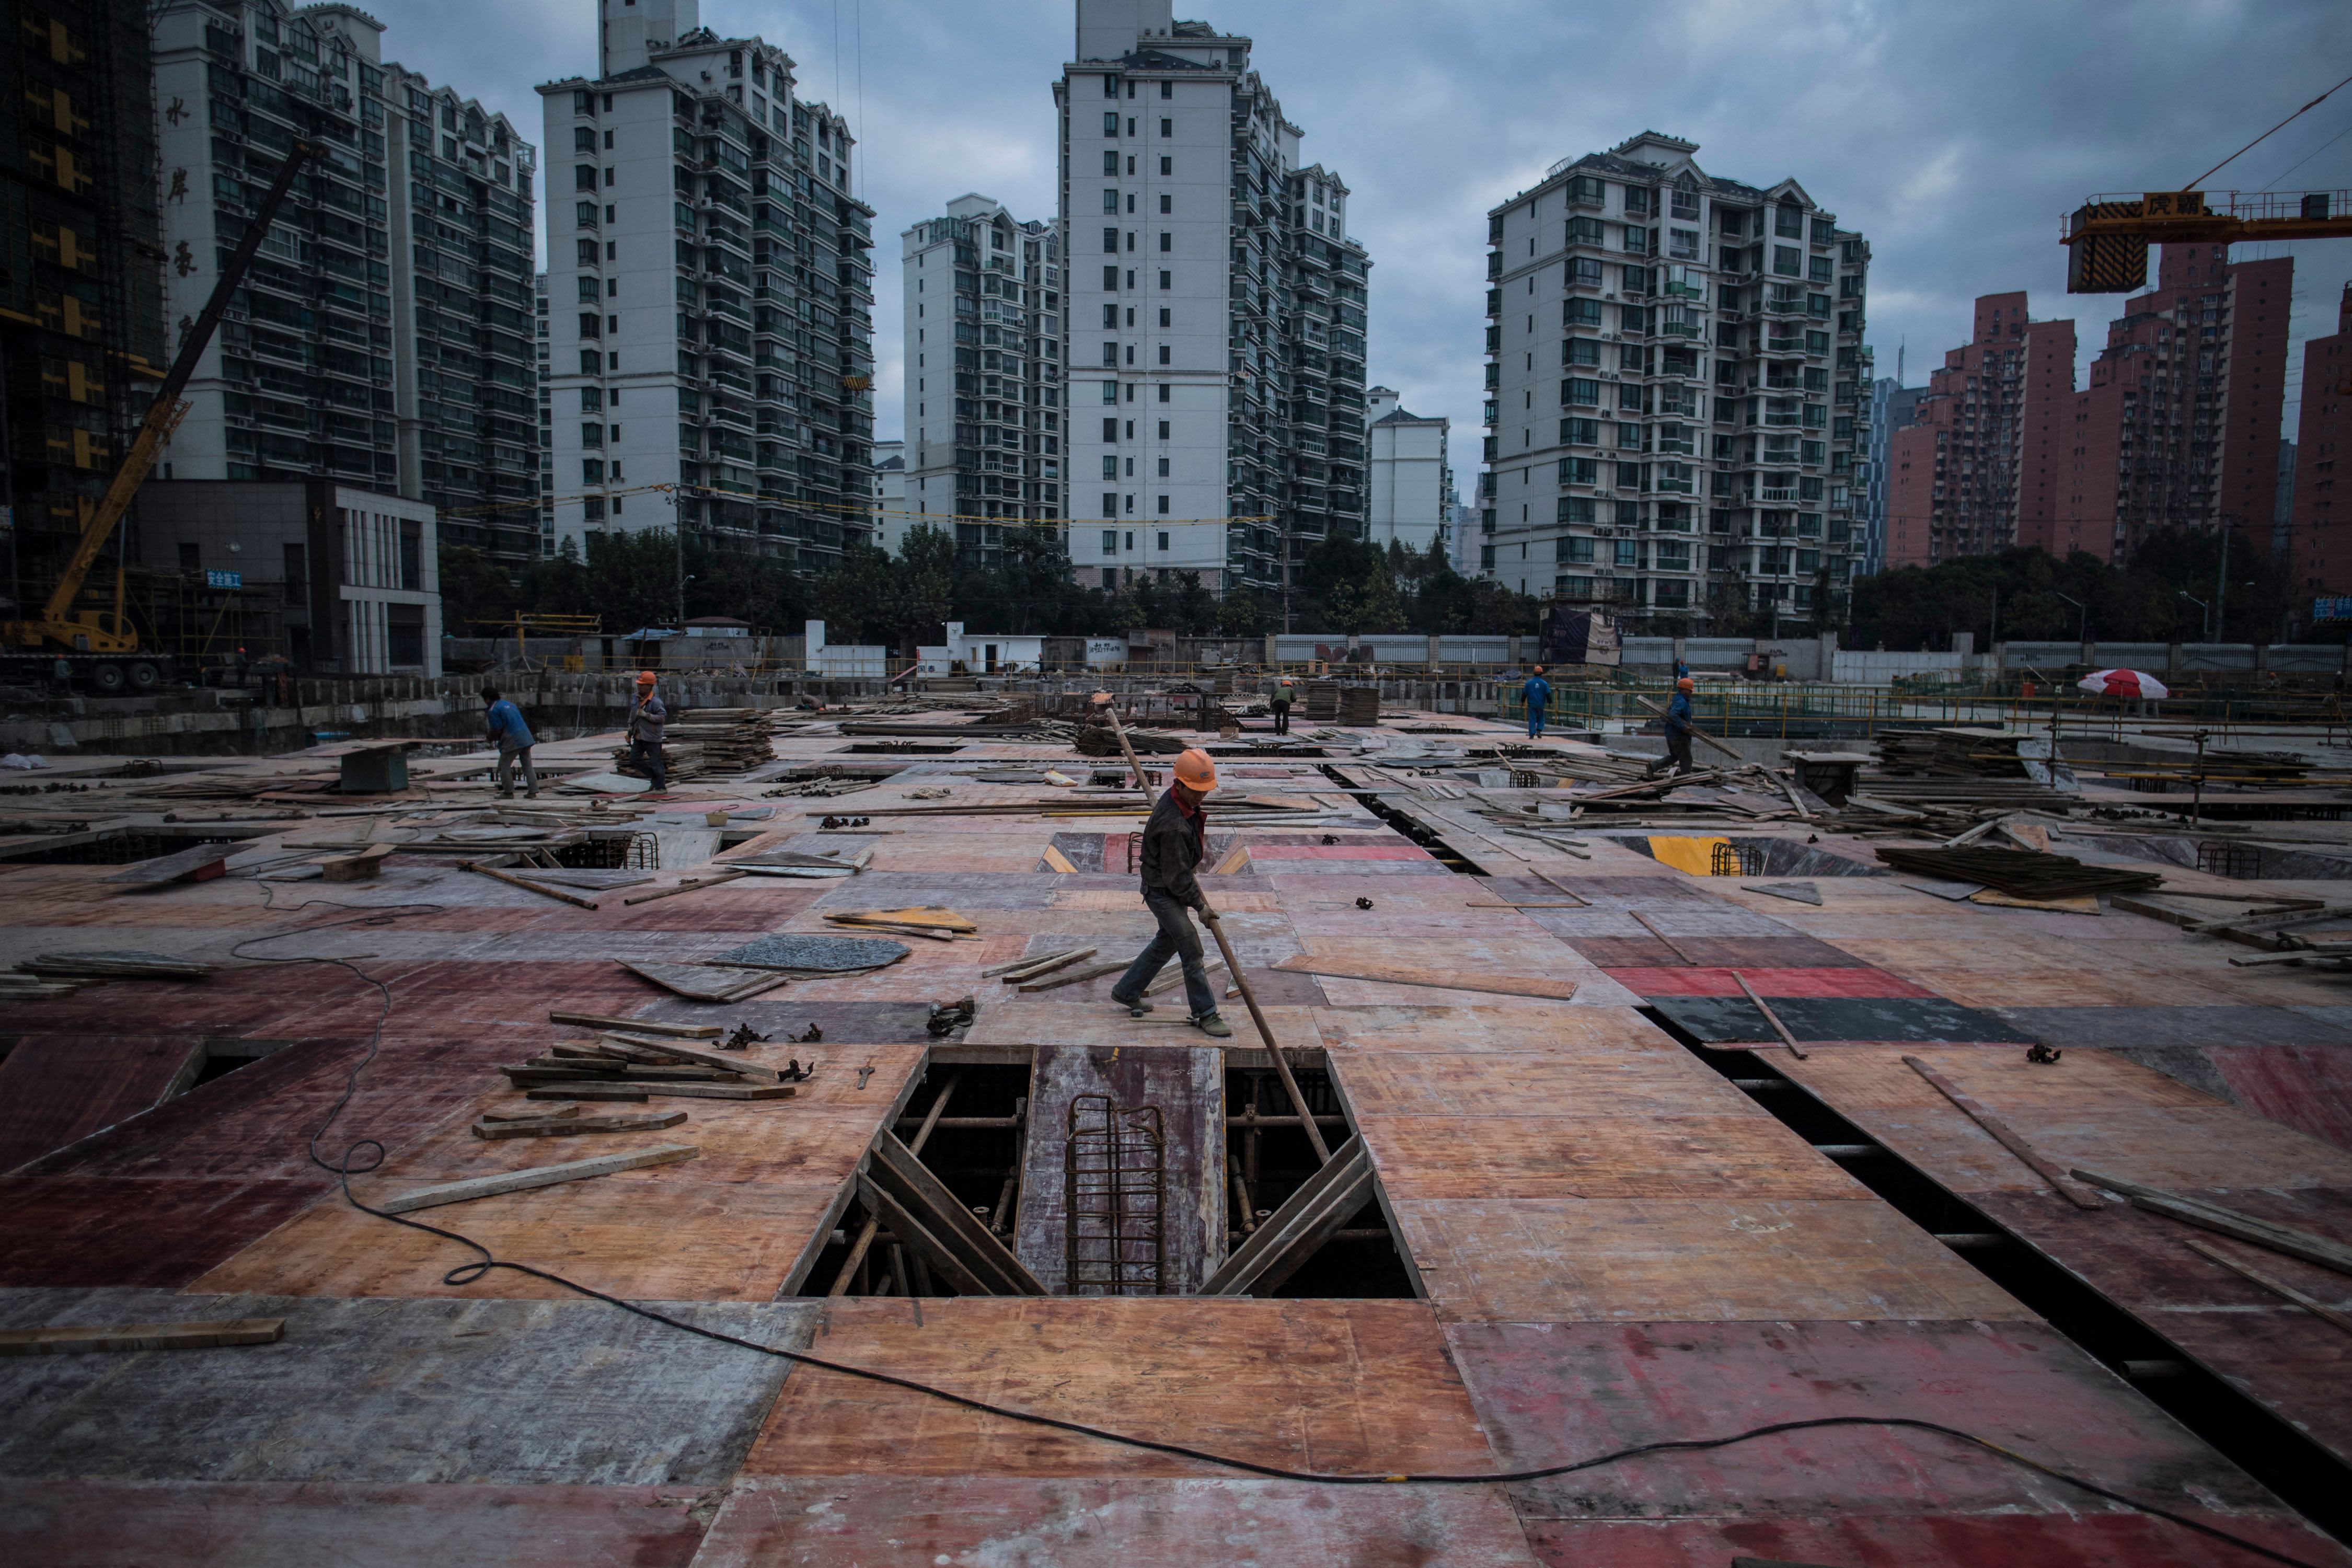 China’s real estate market has been rocked by default fears, and Country Garden has investors spooked